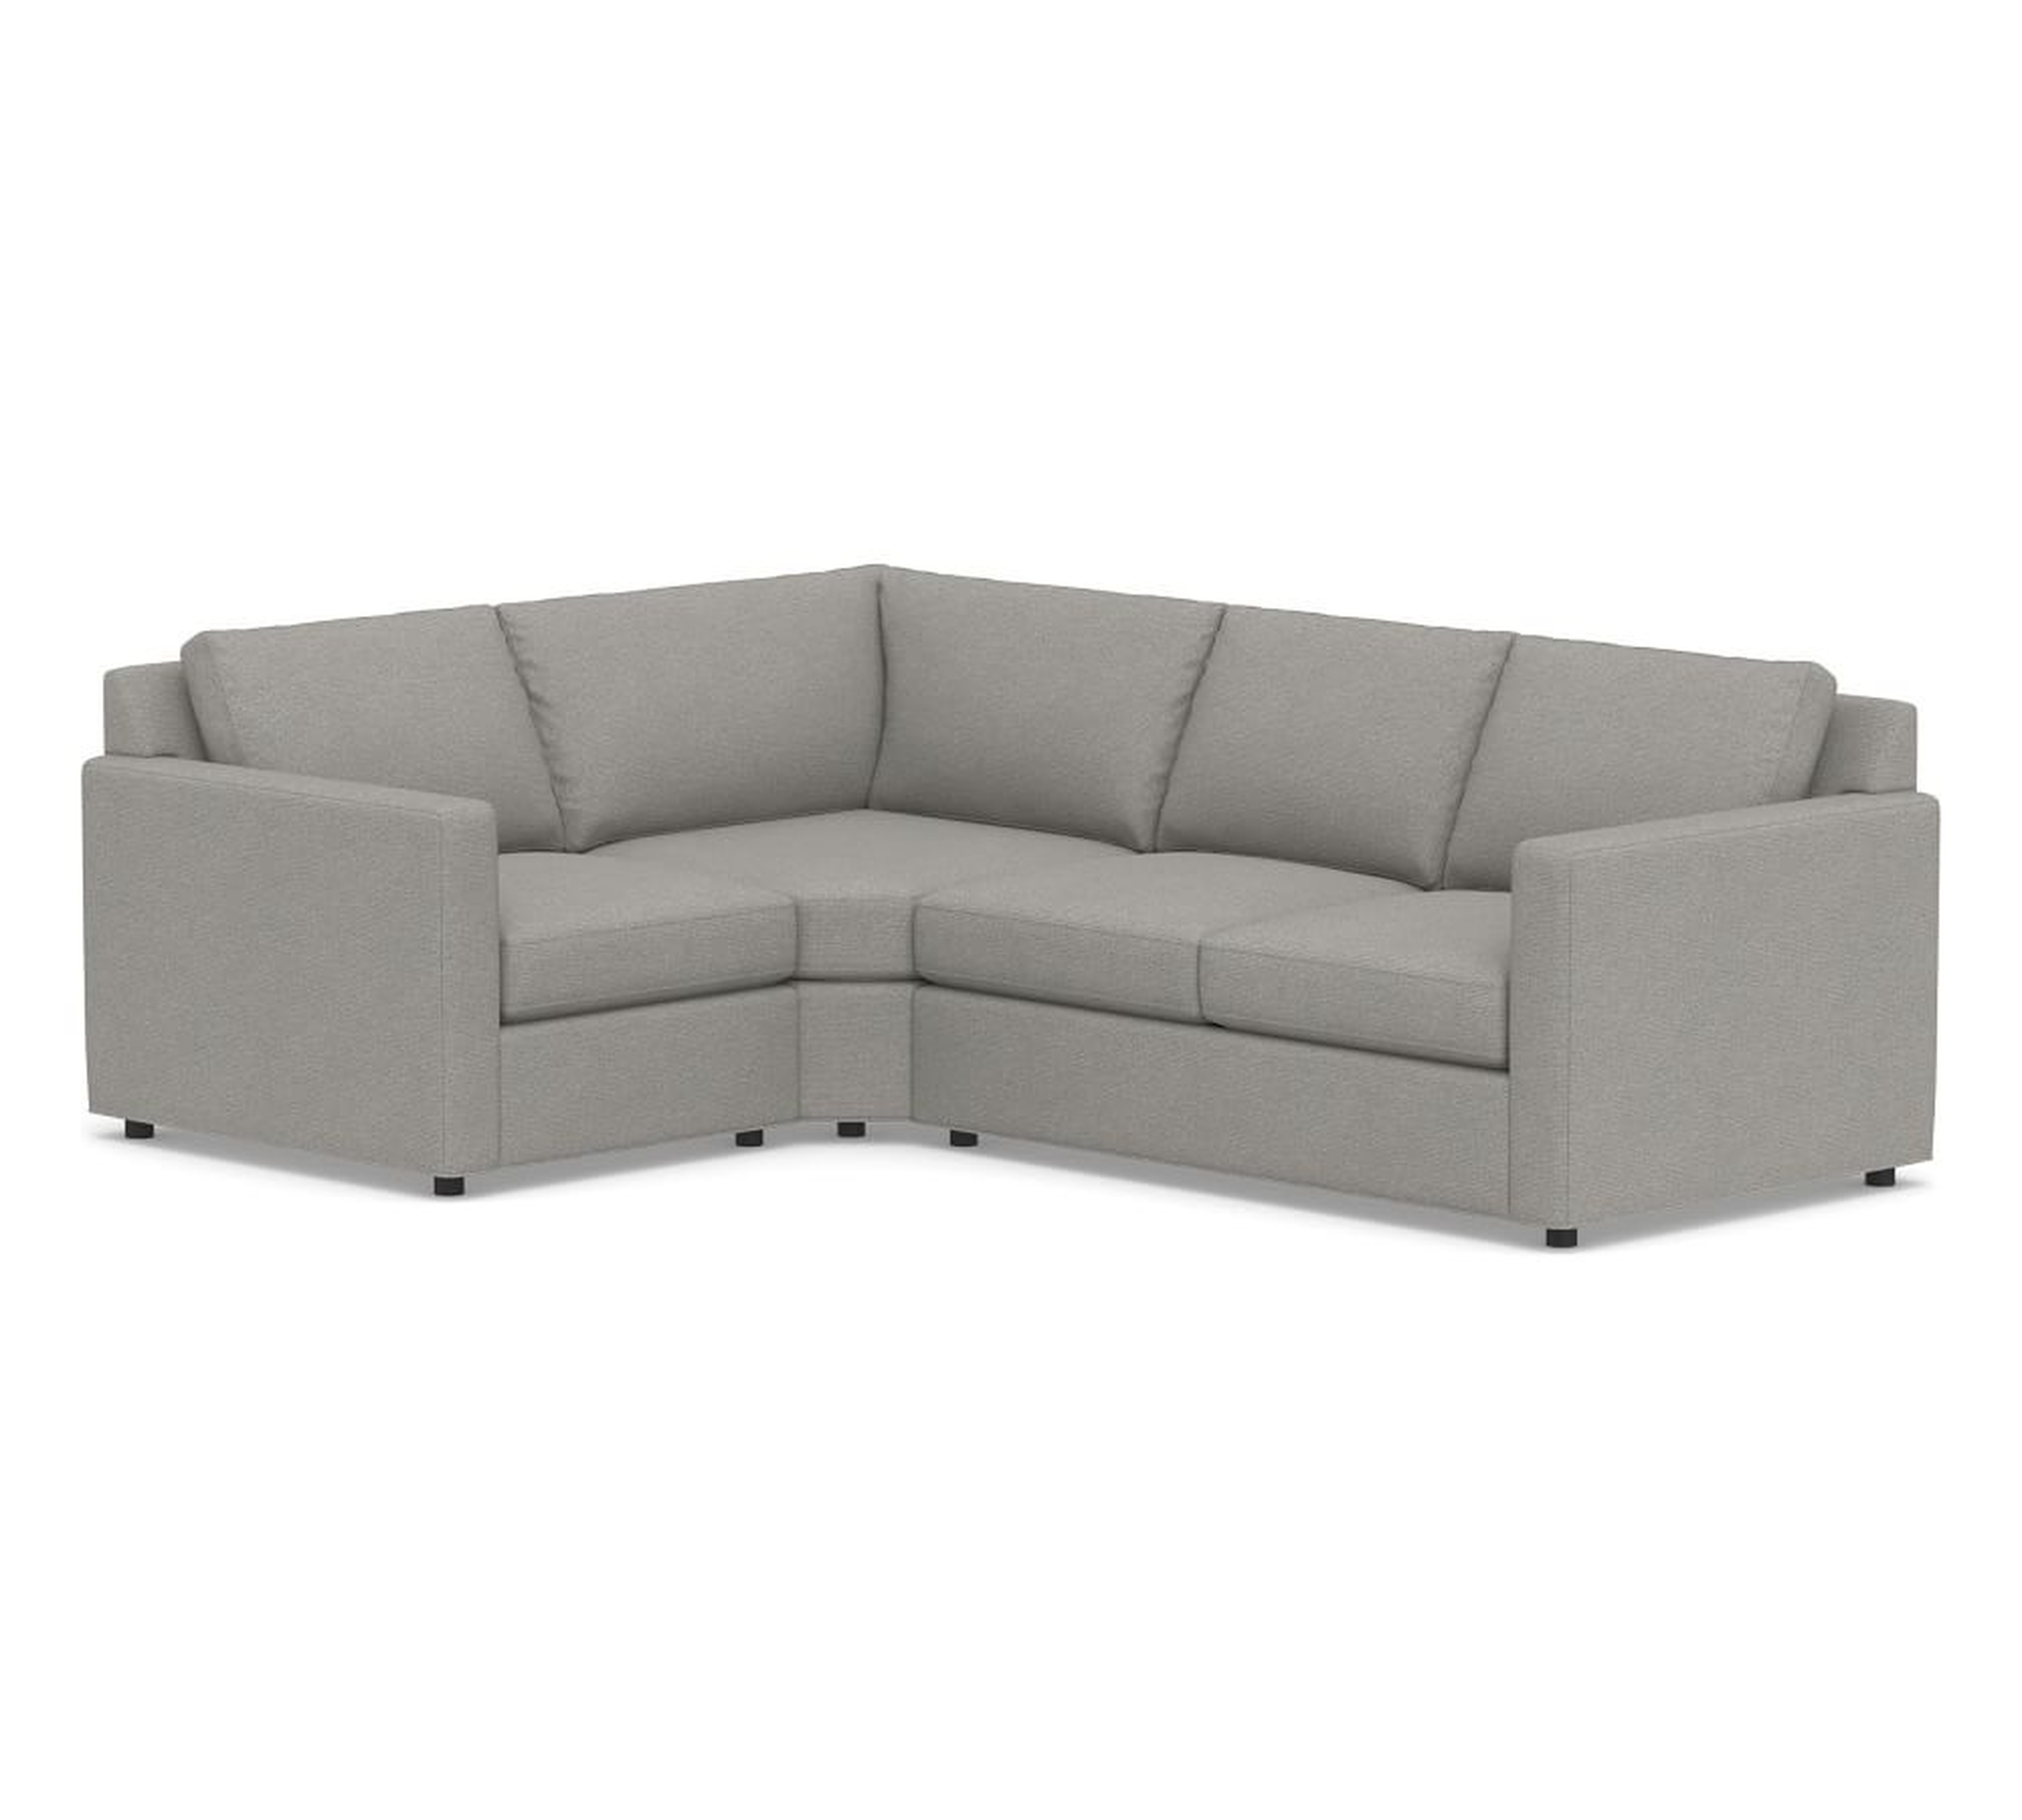 Sanford Square Arm Upholstered Right Arm 3-Piece Wedge Sectional, Polyester Wrapped Cushions, Performance Heathered Basketweave Platinum - Pottery Barn